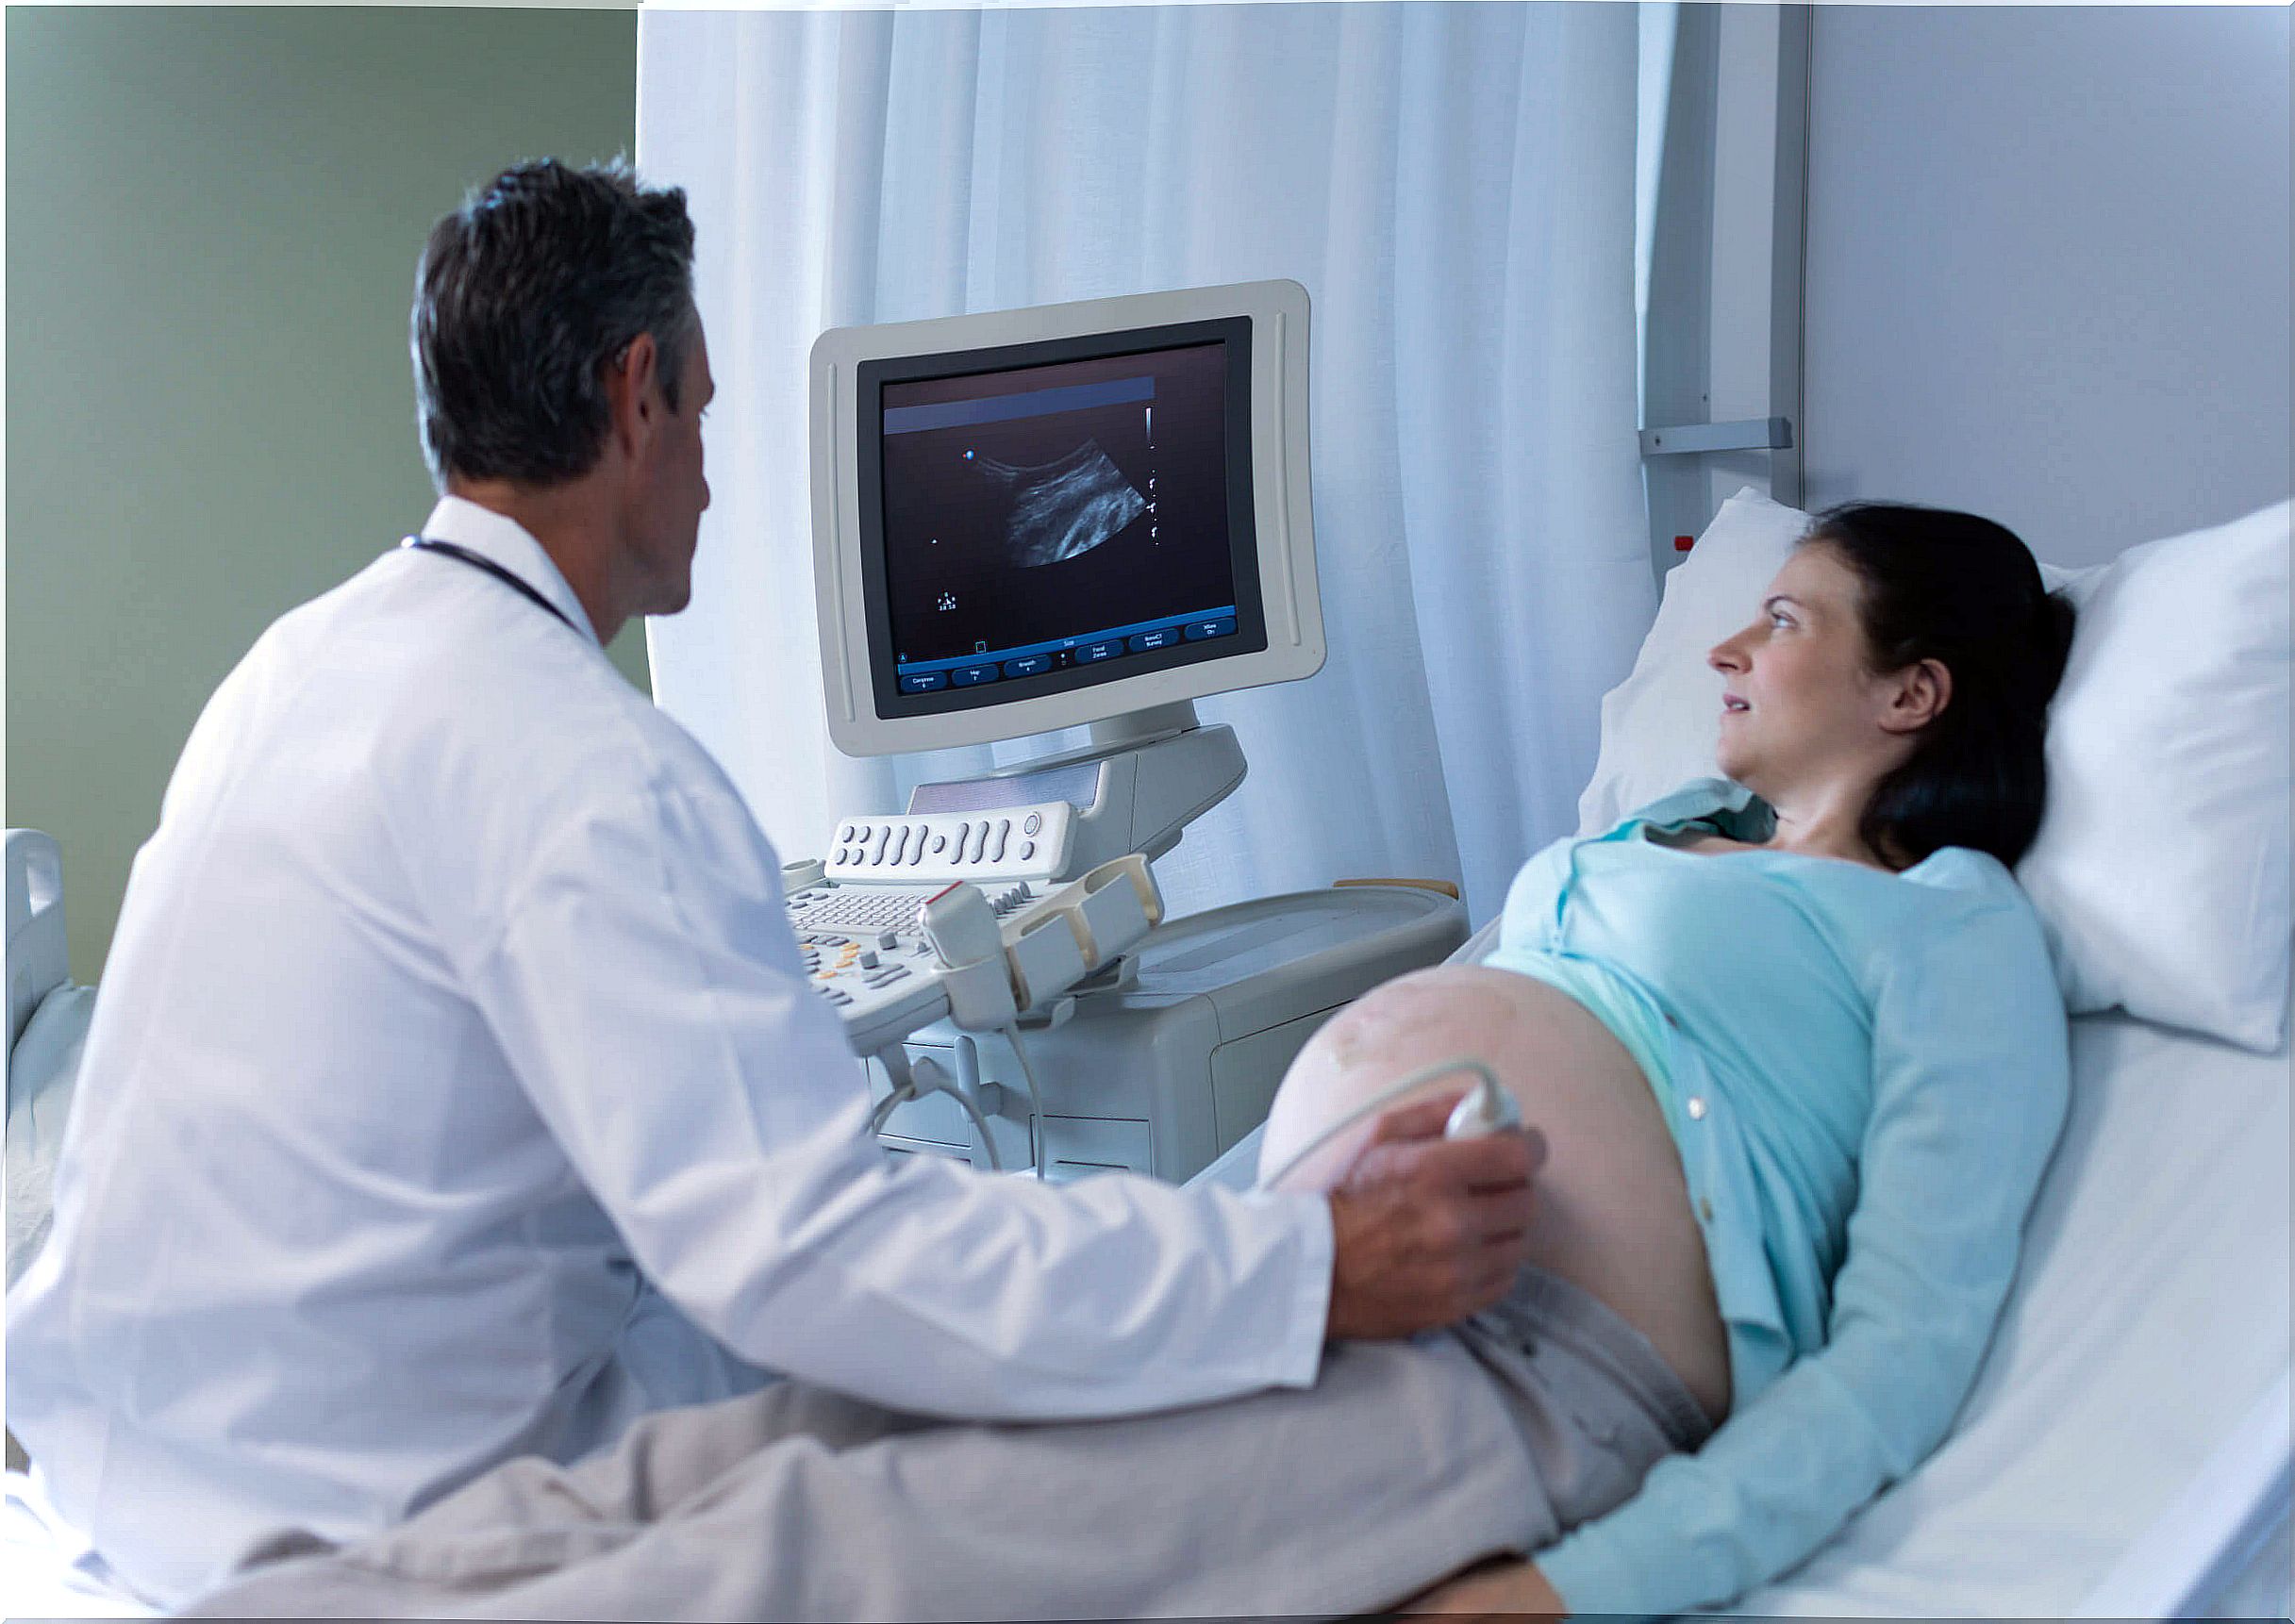 The aged placenta is detected by ultrasound.